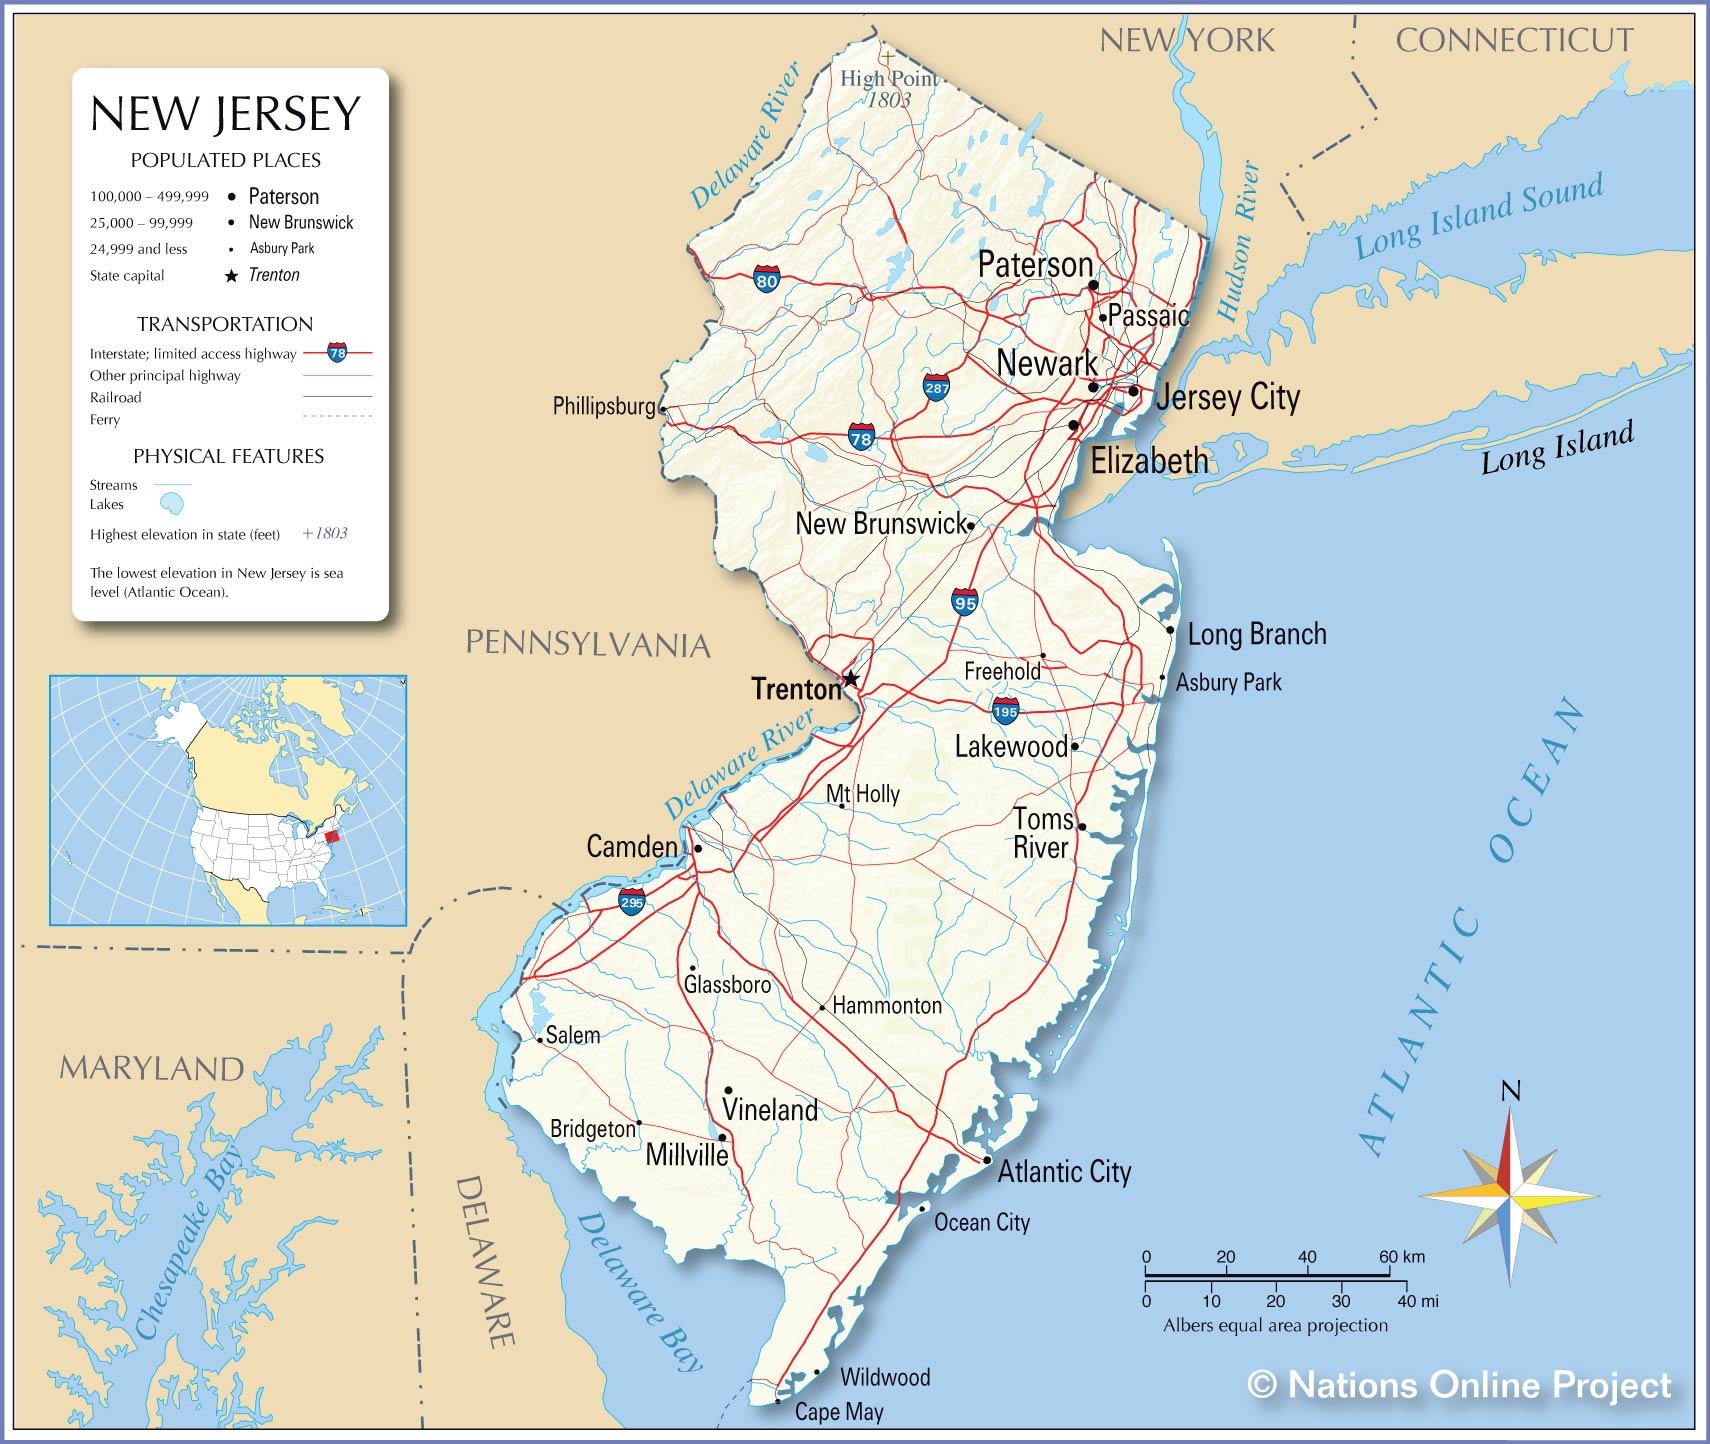 New Jersey, map courtesy of Nations Online Project